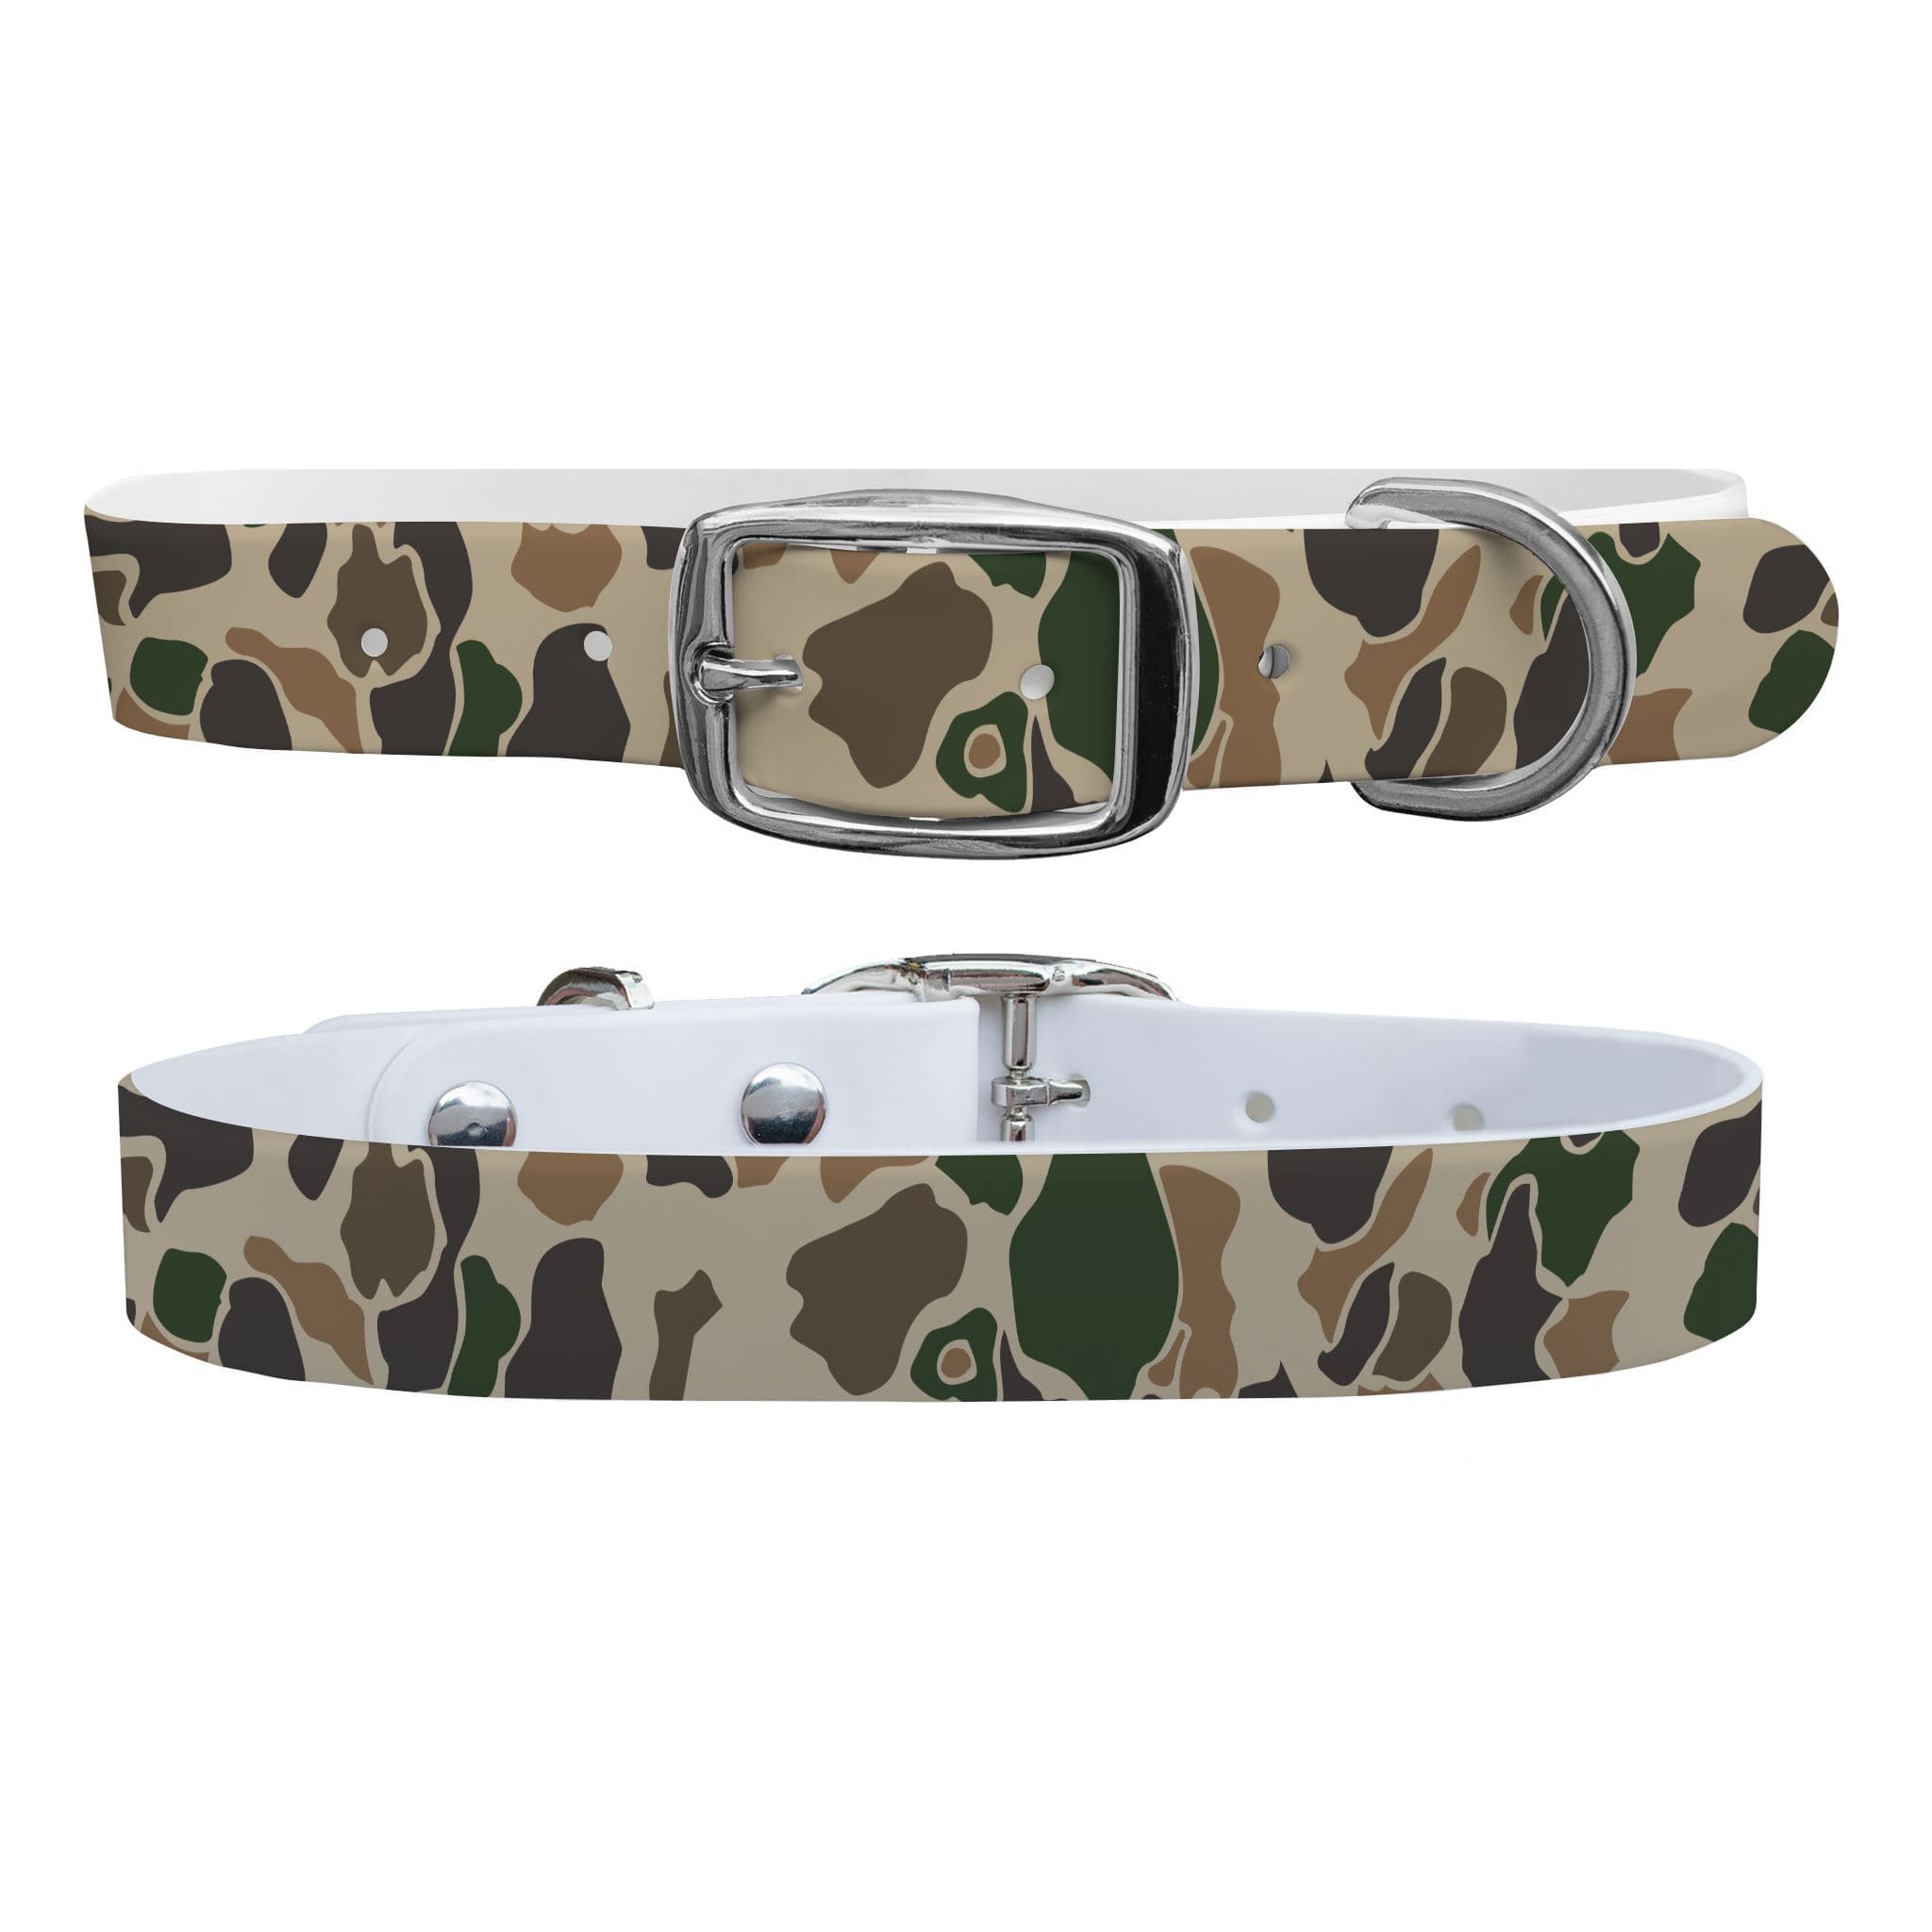 CP - Brigadier Camo Dog Collar With Silver Buckle - Large